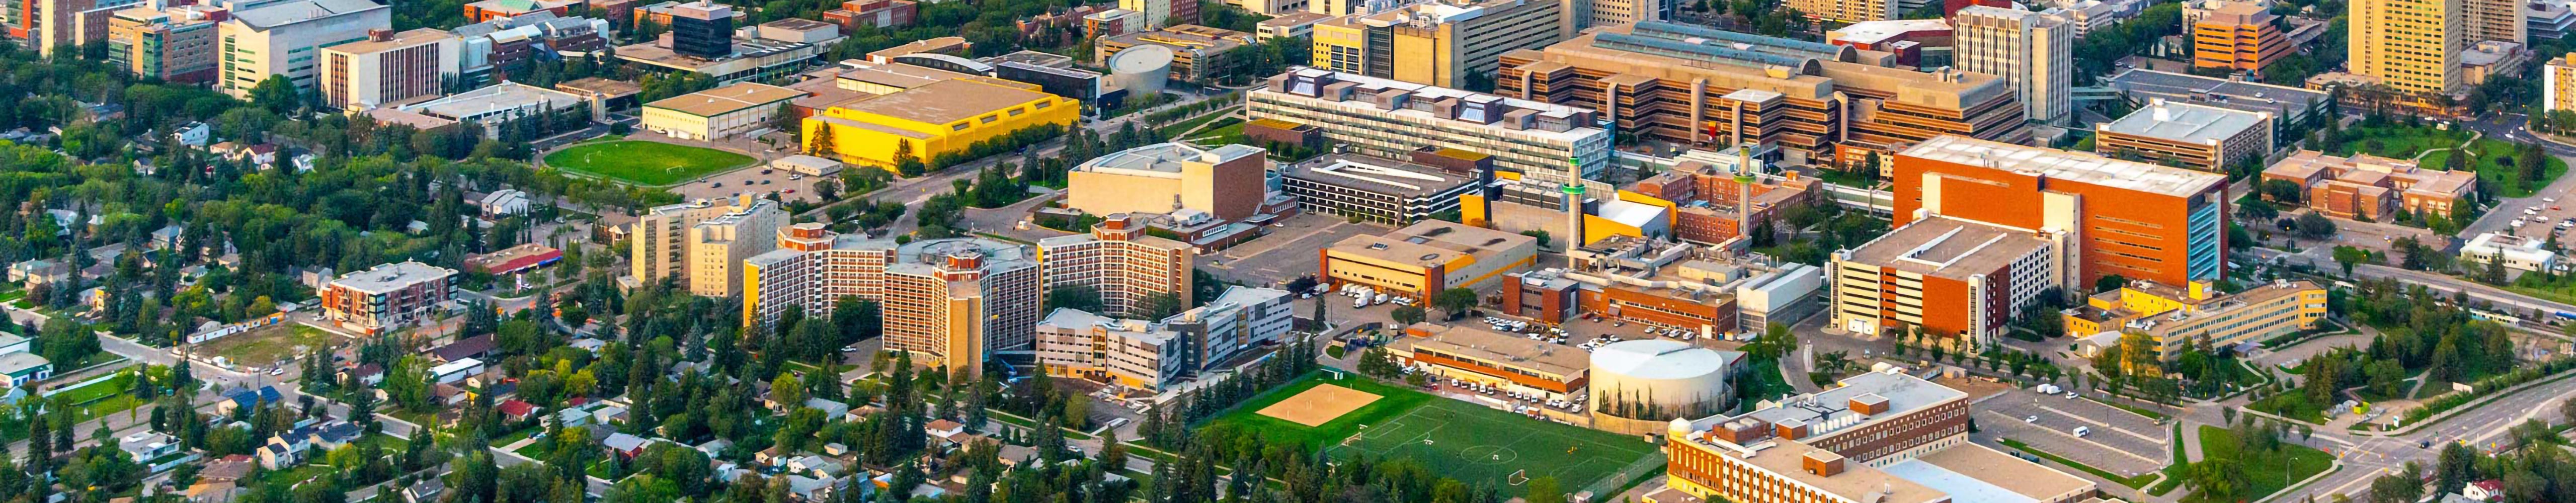 Aerial view of North Campus